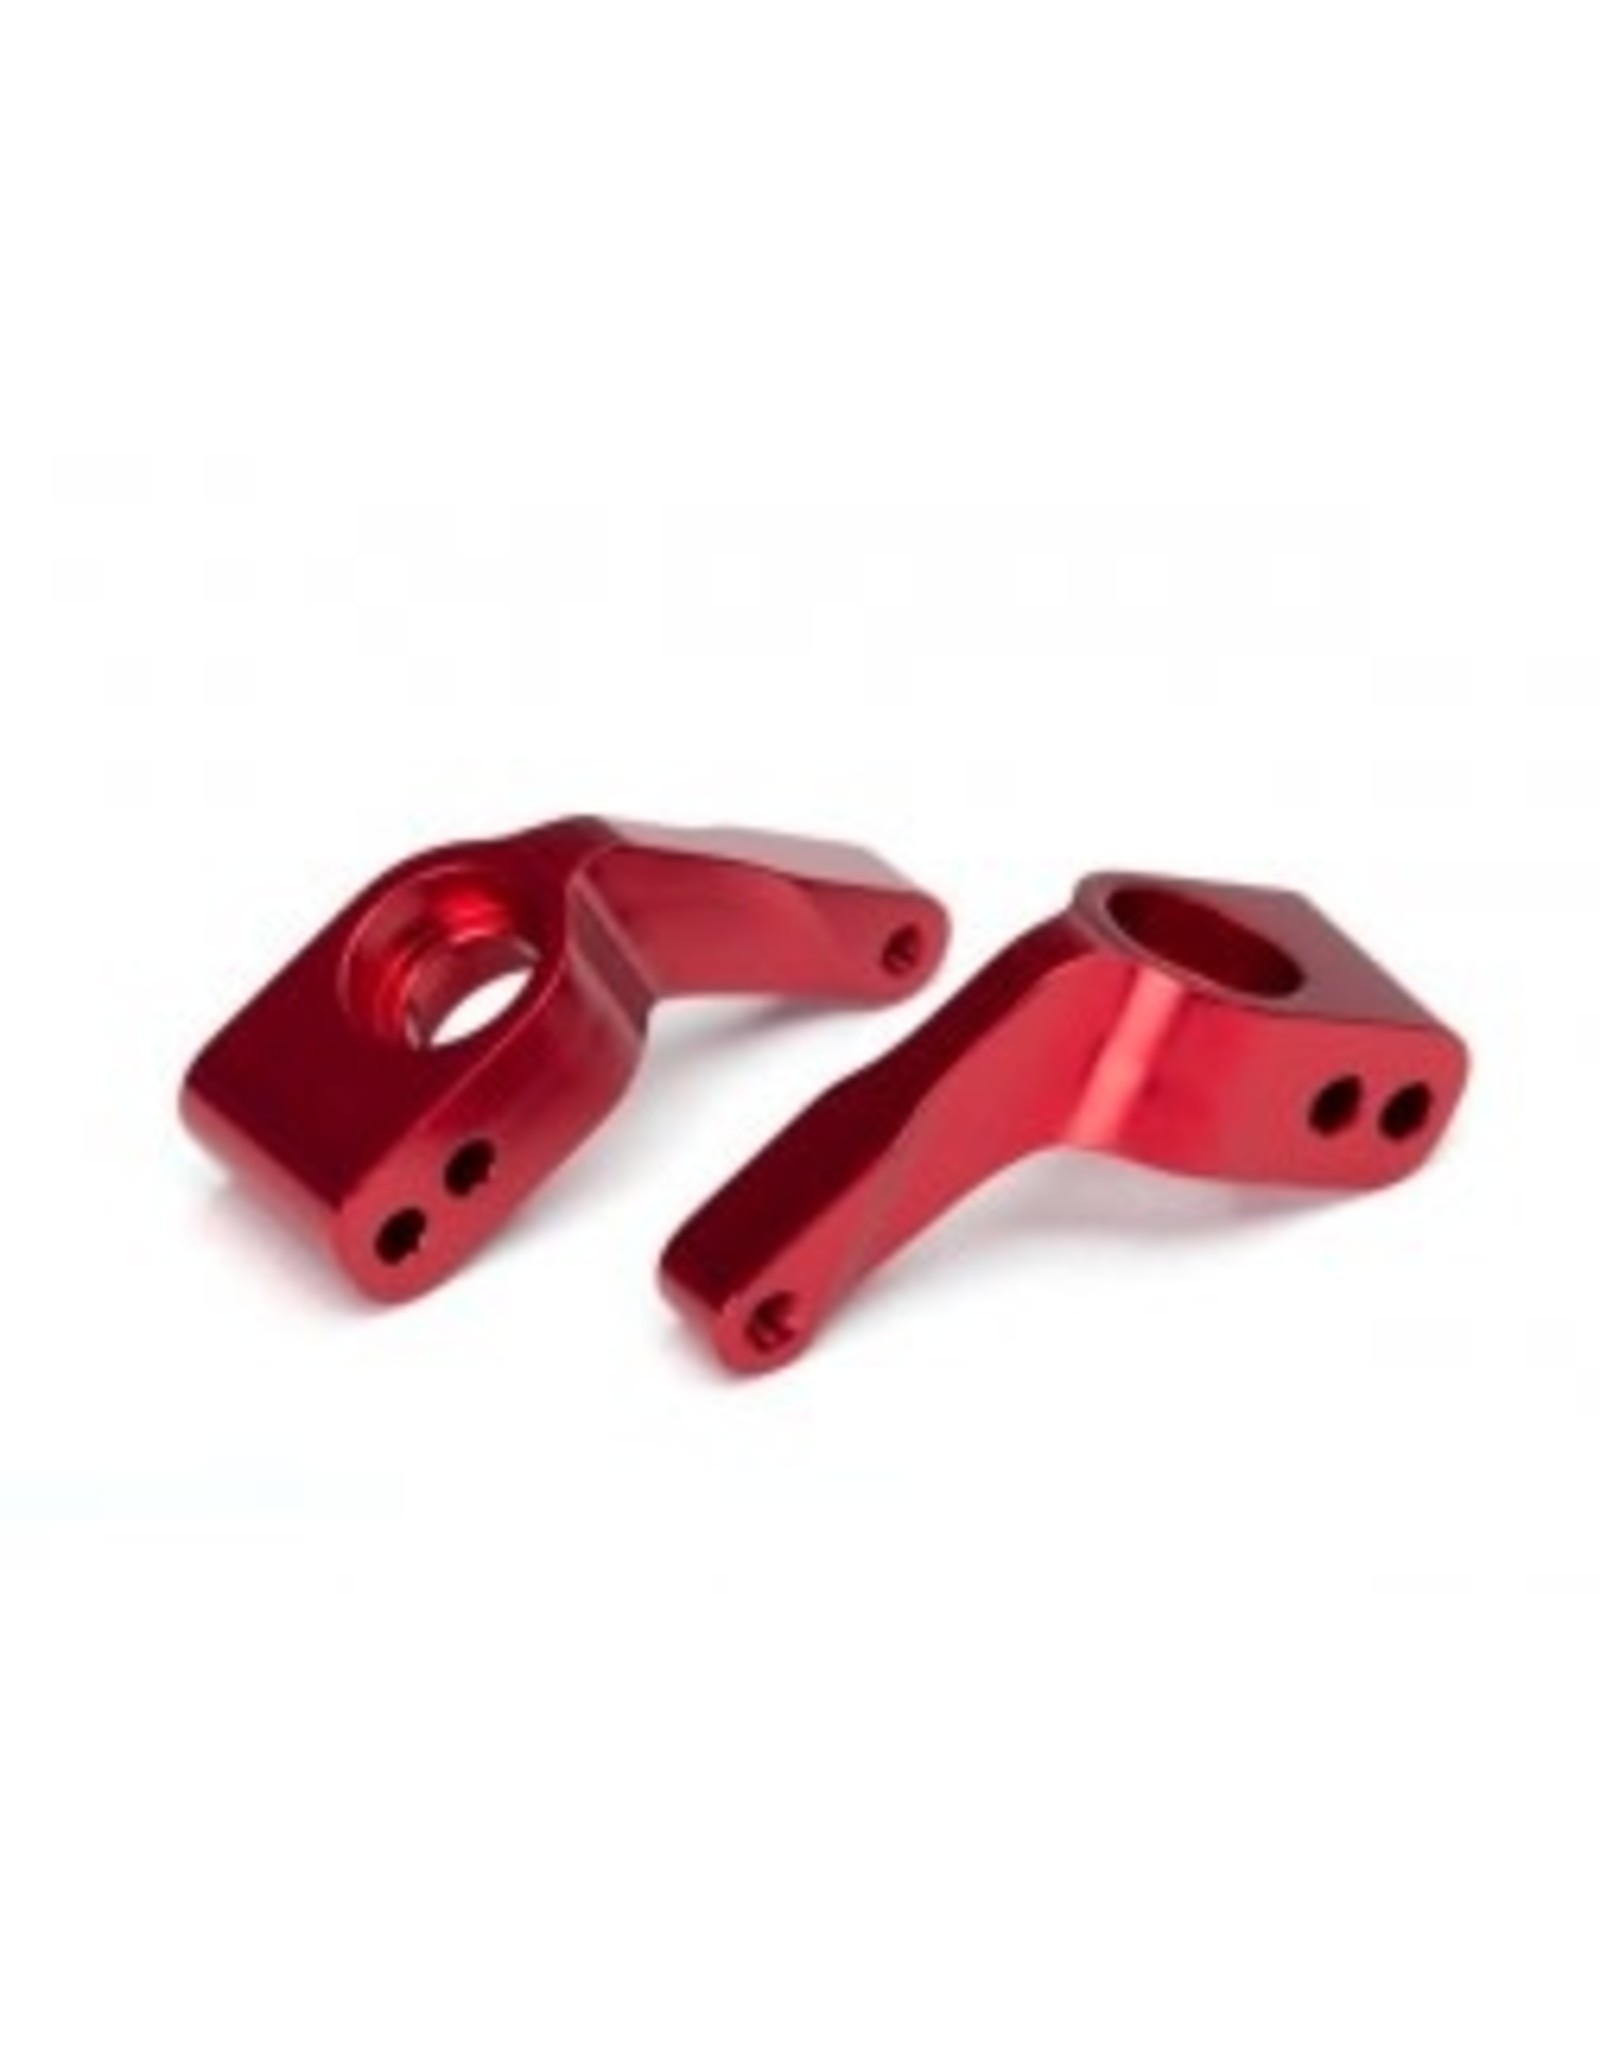 Traxxas [Stub axle carriers, Rustler®/Stampede®/Bandit (2), 6061-T6 aluminum (red-anodized)/ 5x11mm ball bearings (4)] Stub axle carriers, Rustler®/Stampede®/Bandit (2), 6061-T6 aluminum (red-anodized)/ 5x11mm ball bearings (4)